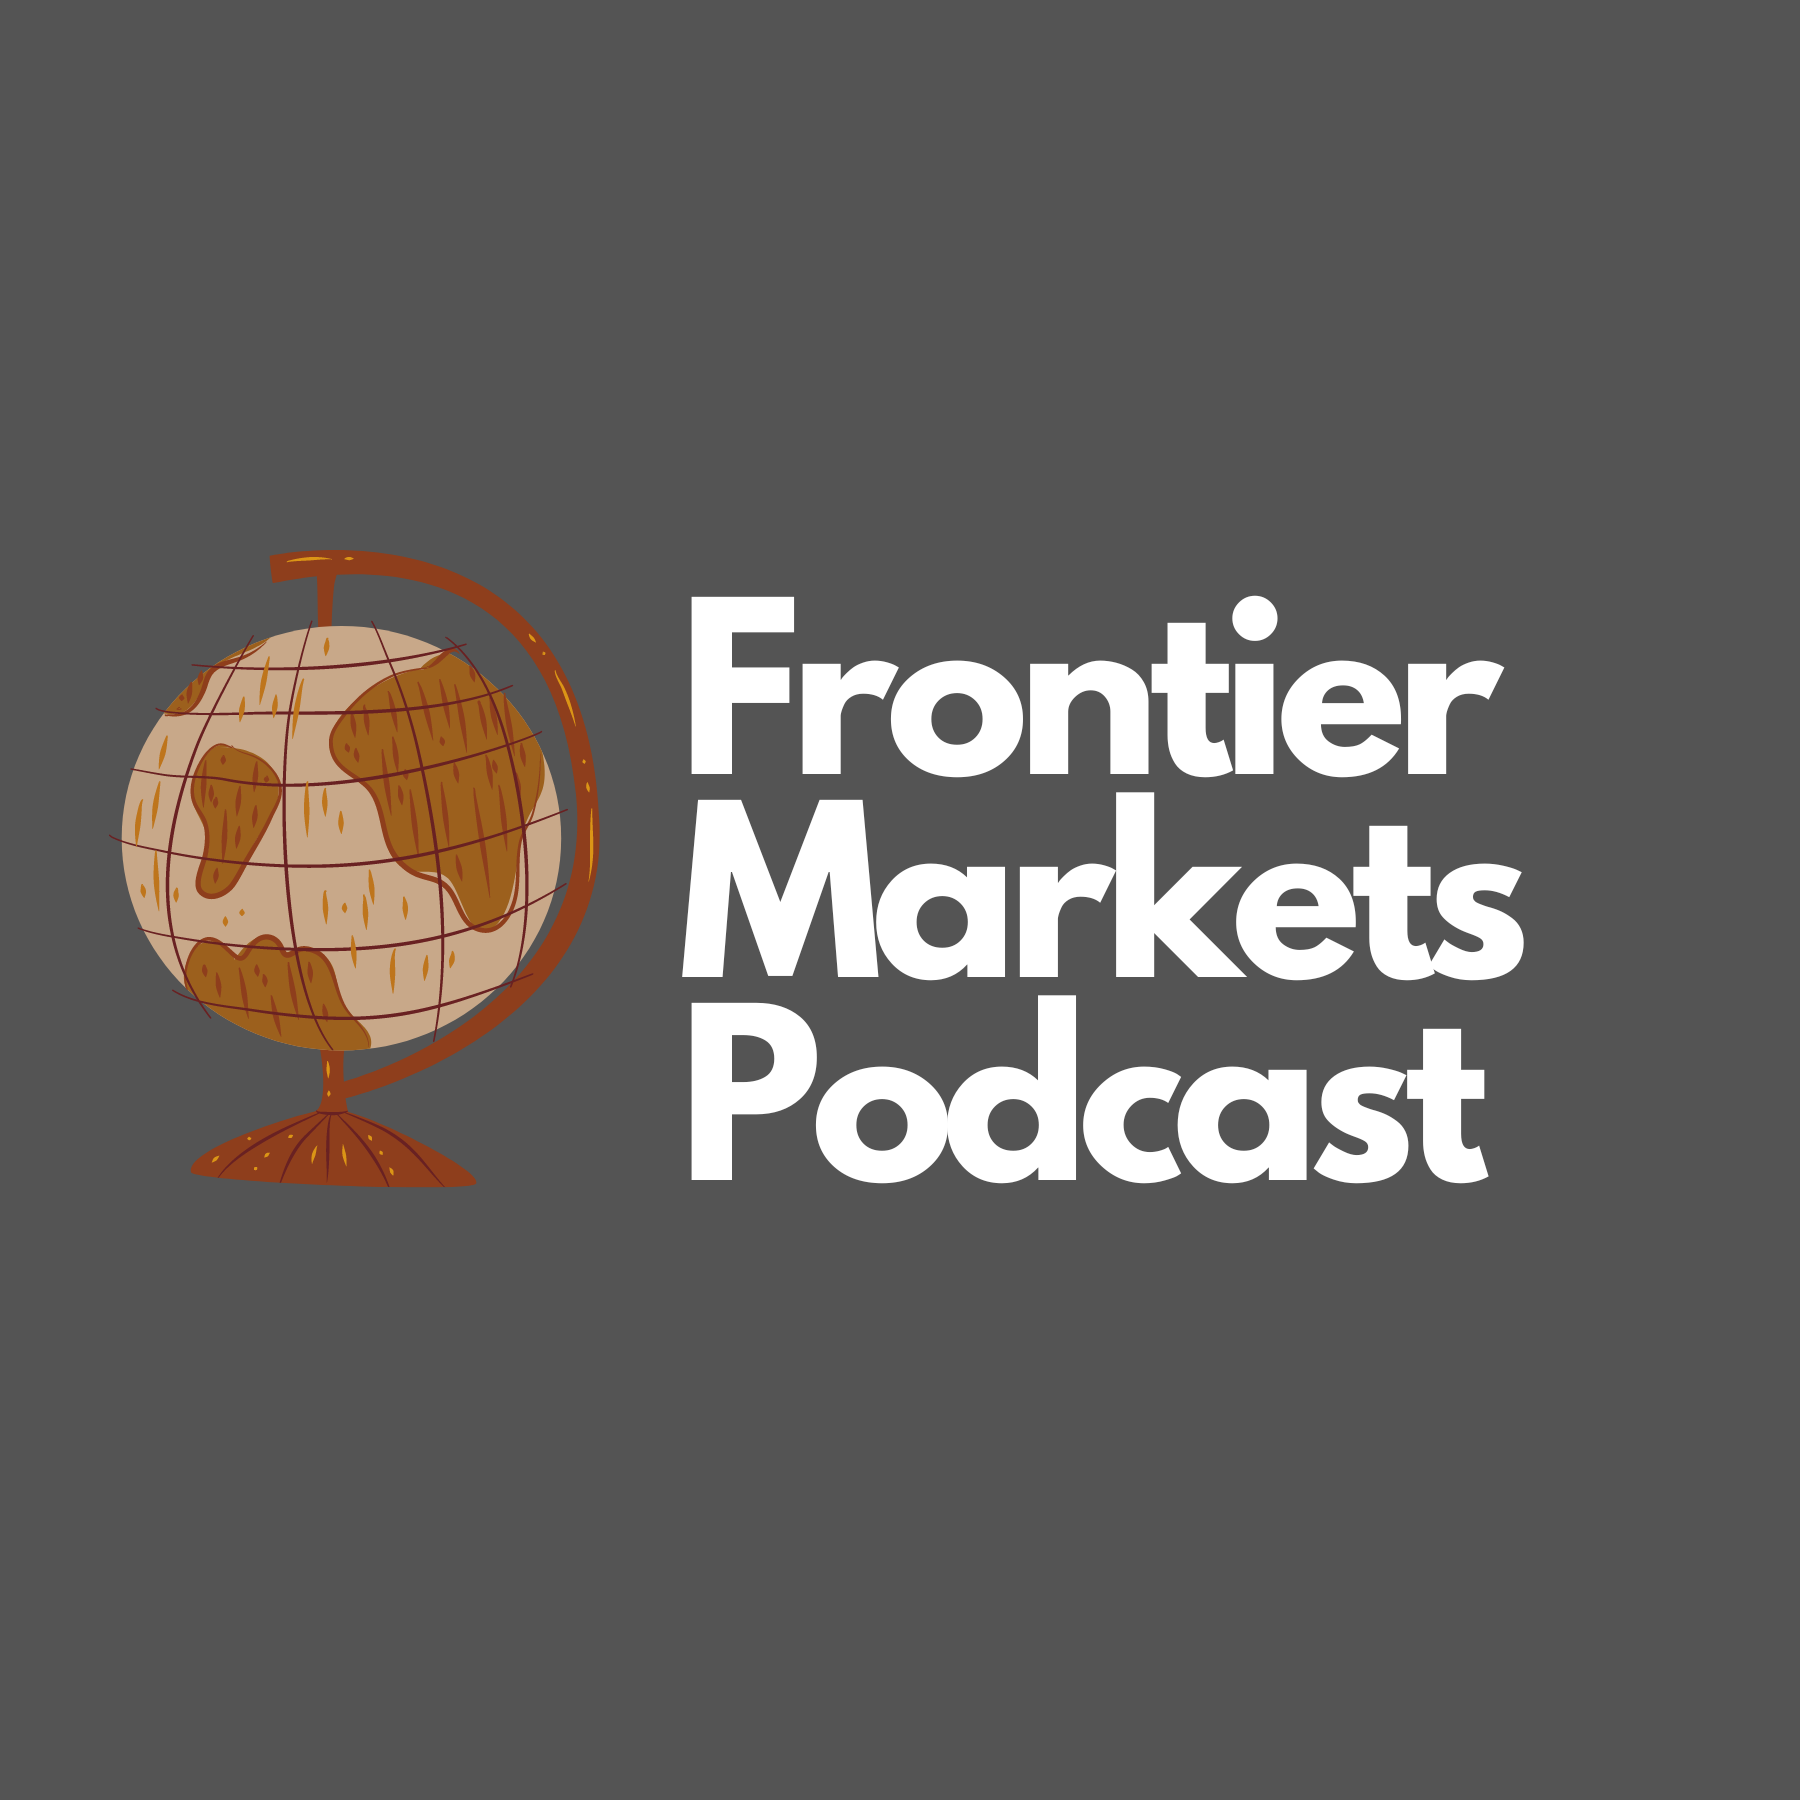 Artwork for podcast Frontier Markets Podcast